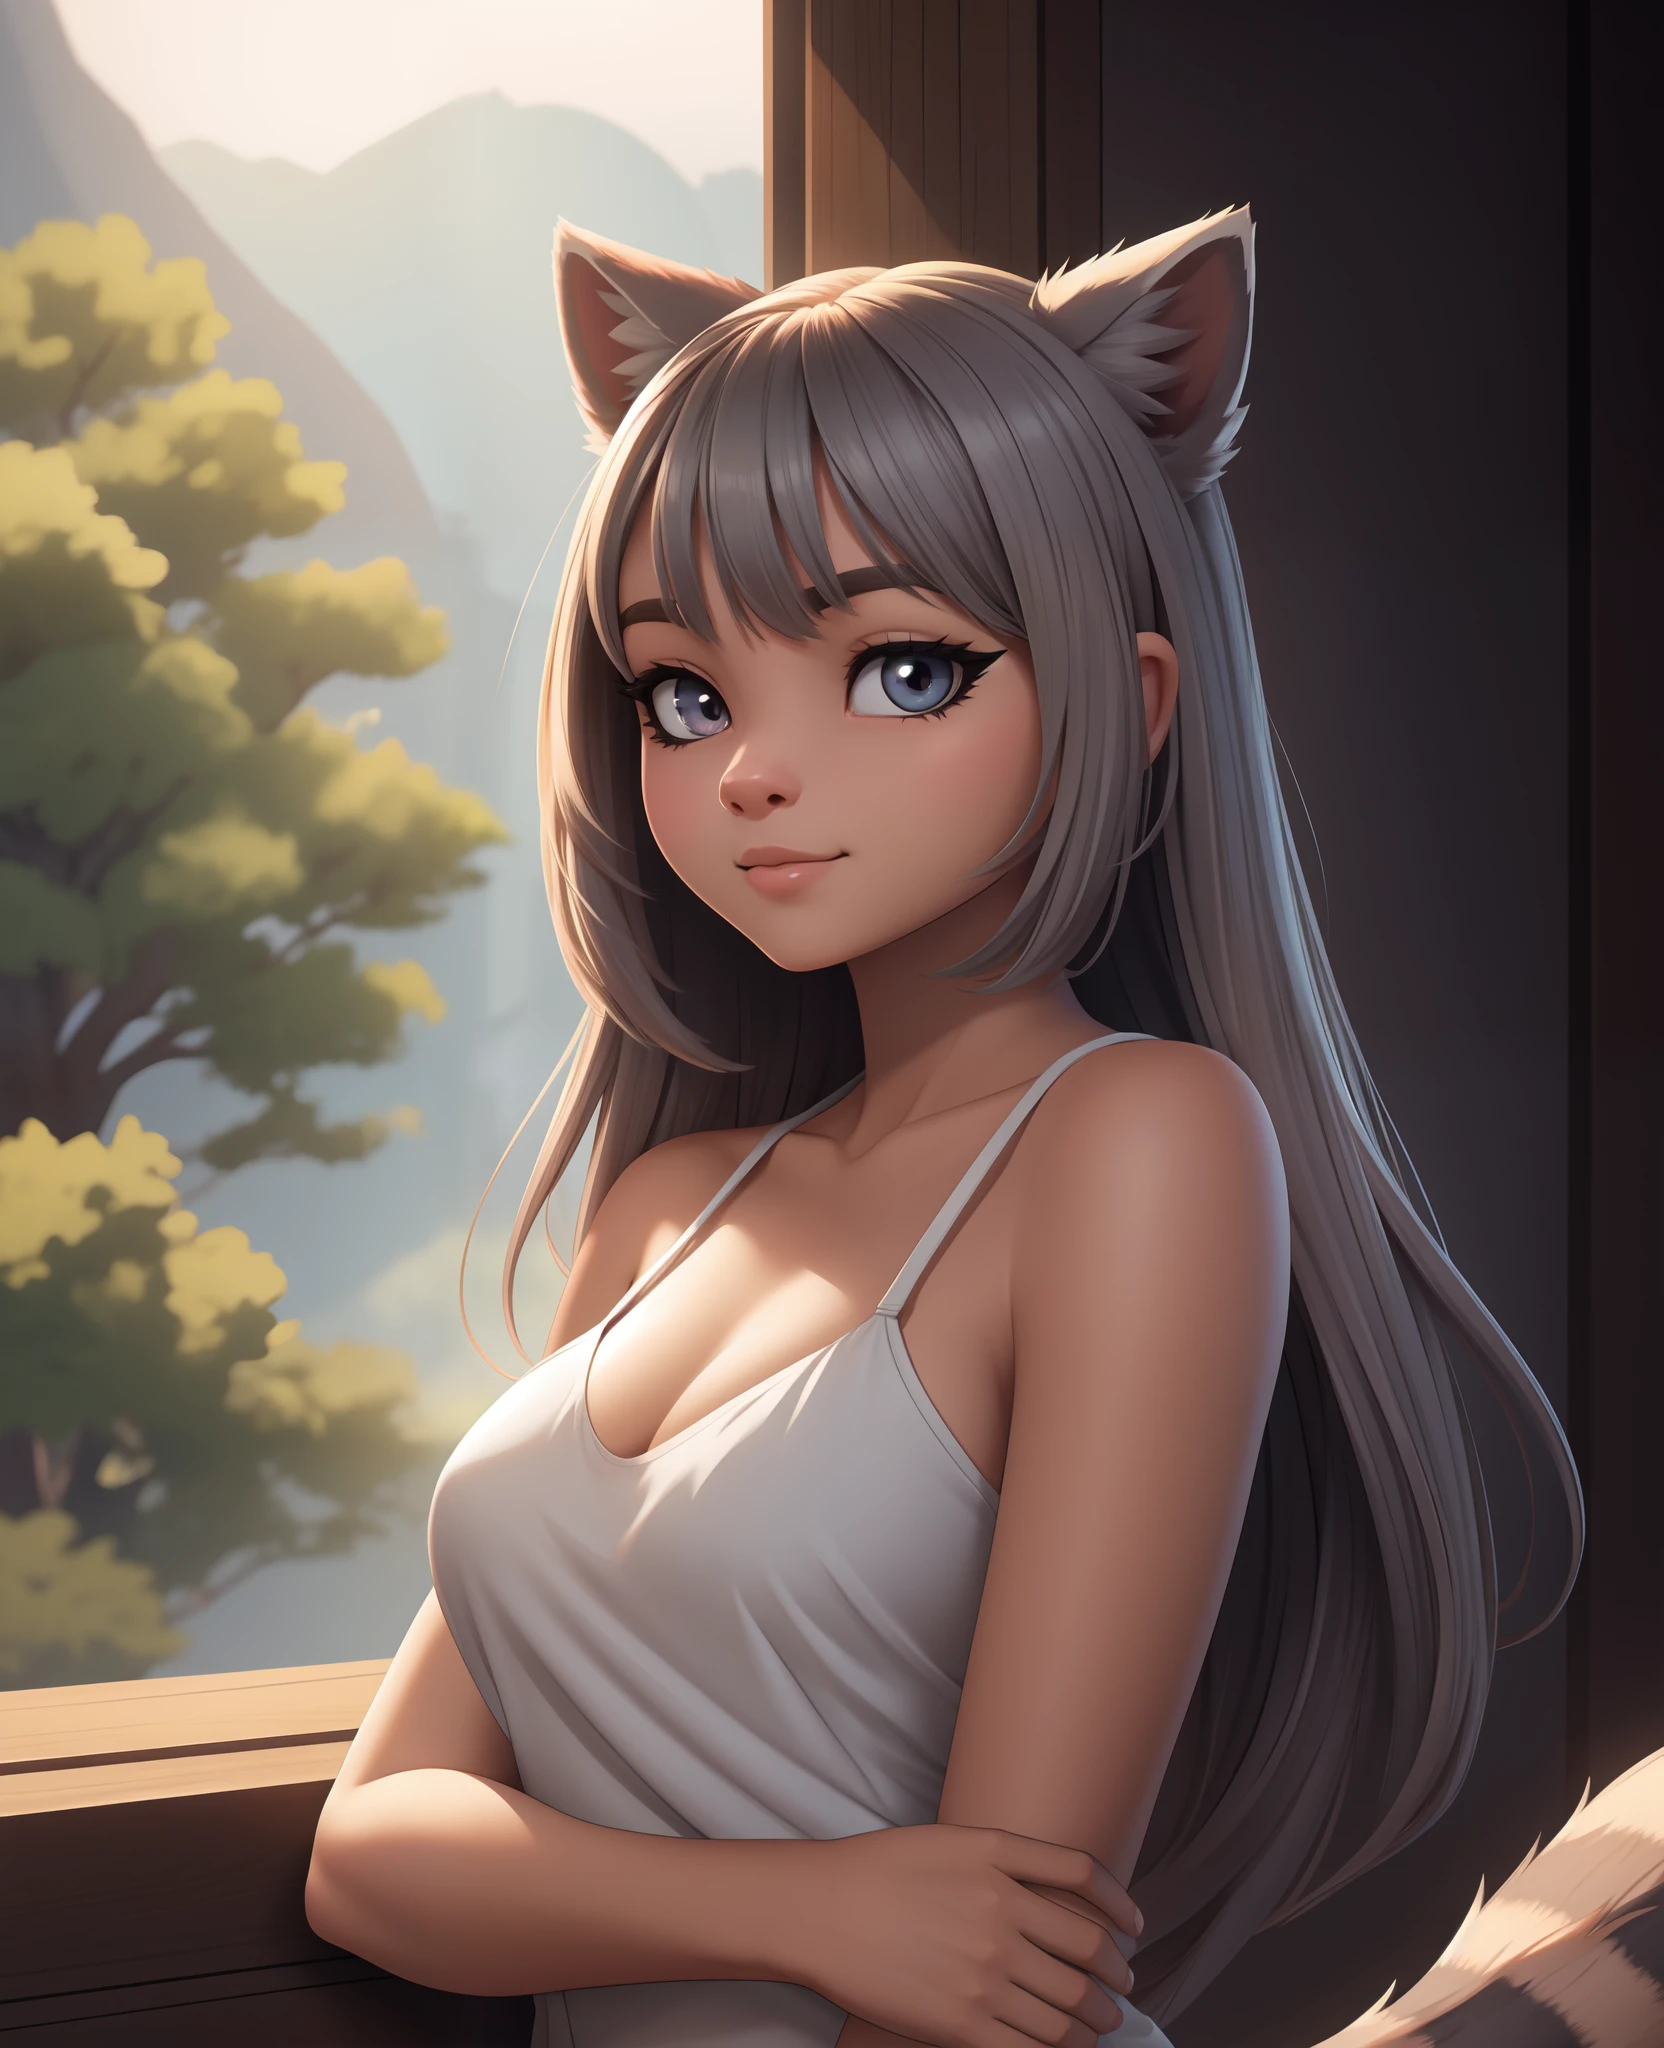 image of anthro racoon girl, female, humanoid, furry, beauty, cute, adorable, grey skin color, hi res, sharp, detailed background